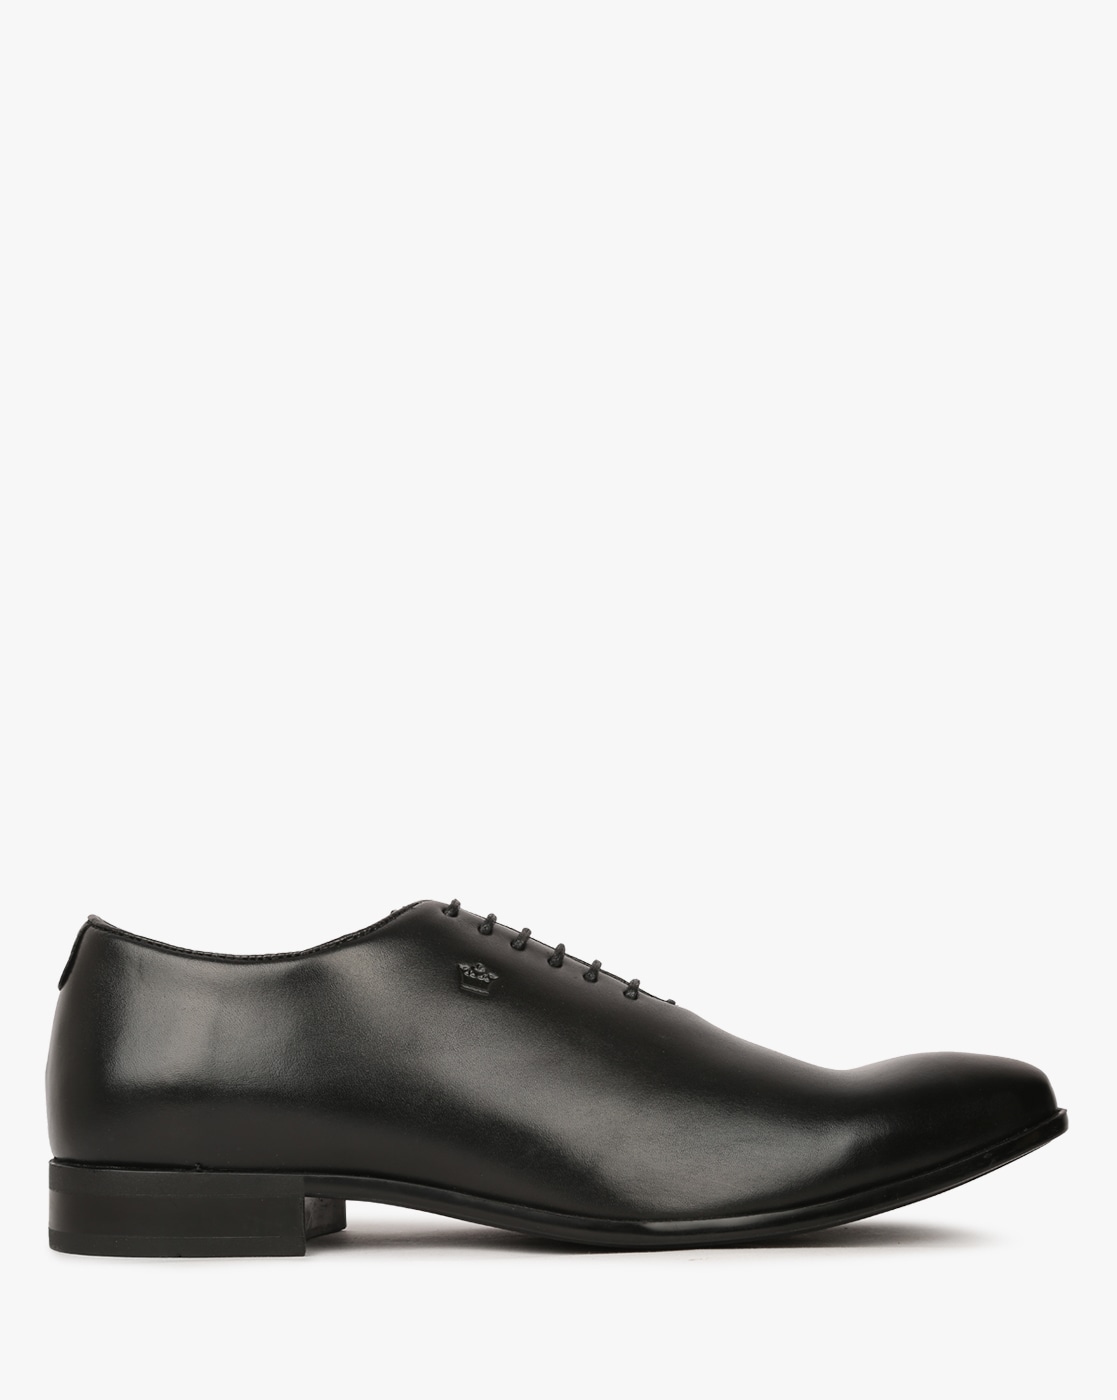 louis philippe shoes for mens